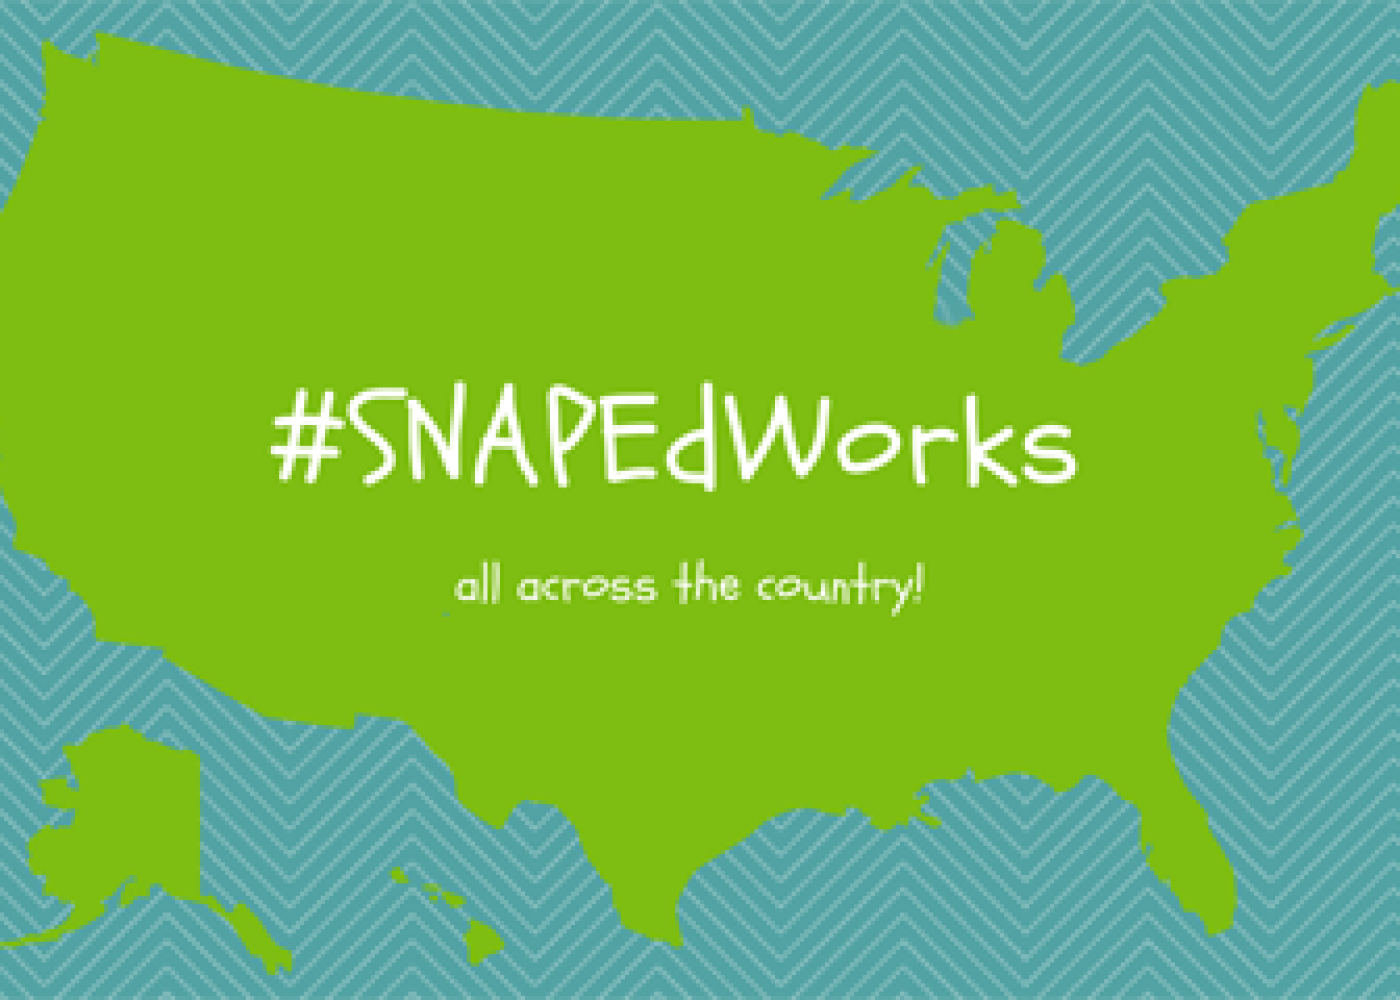 snapedworks hashtag on a map of US